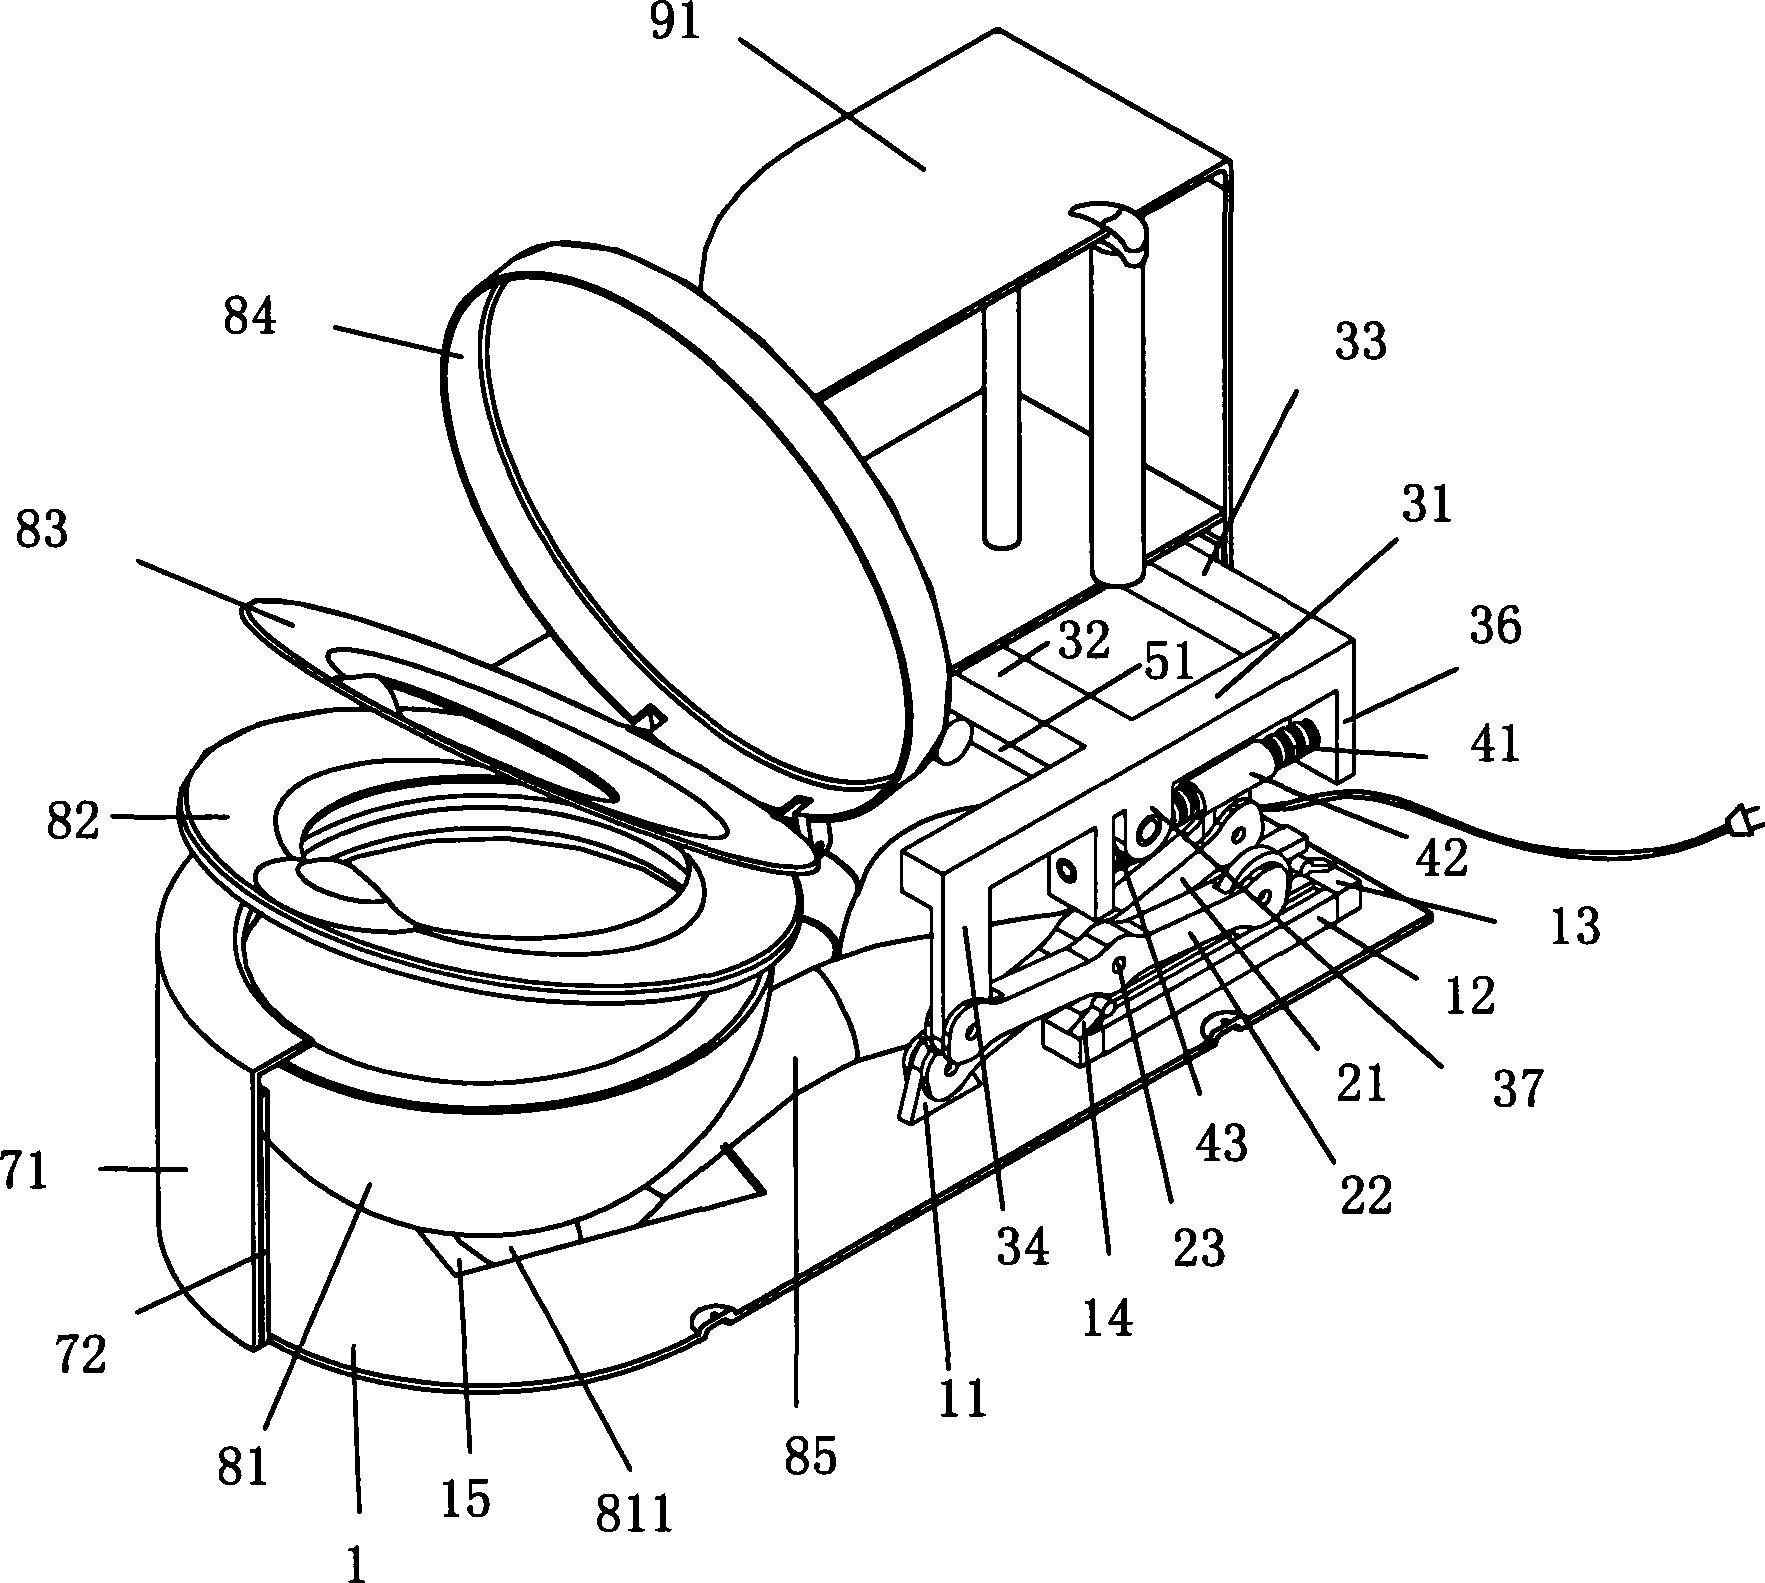 Elevating gear of water closet